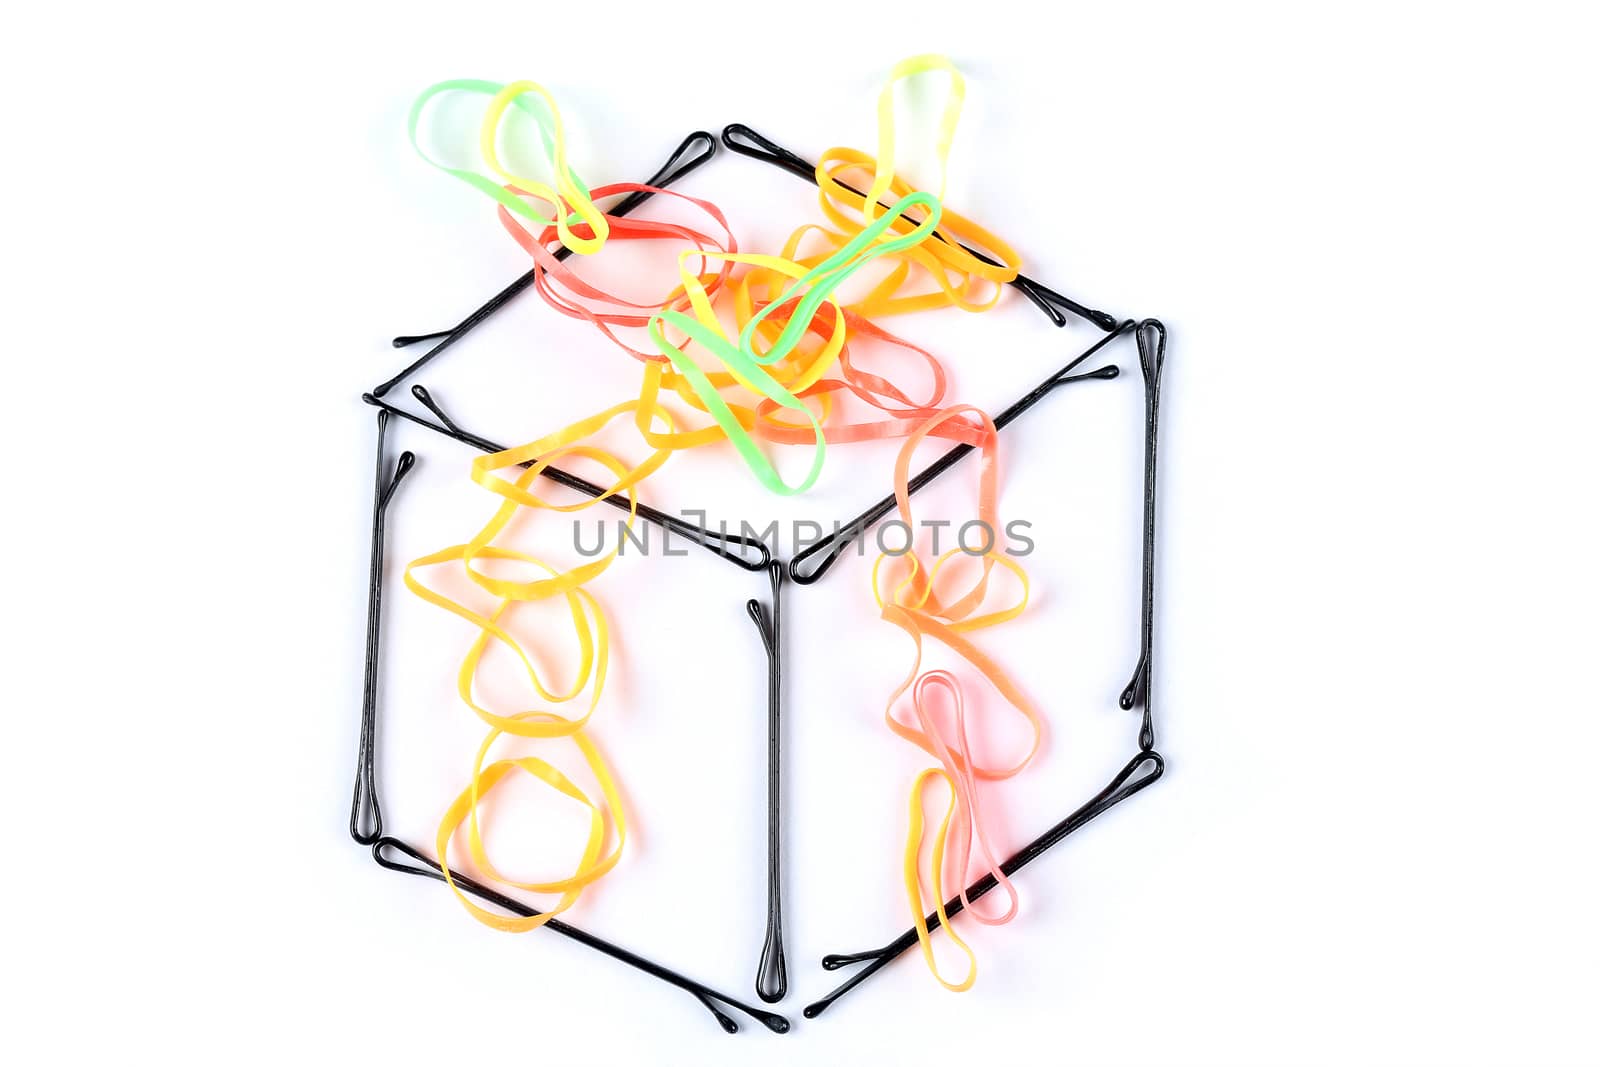 creative gift box made by hair clips and colorful rubber bands on white background